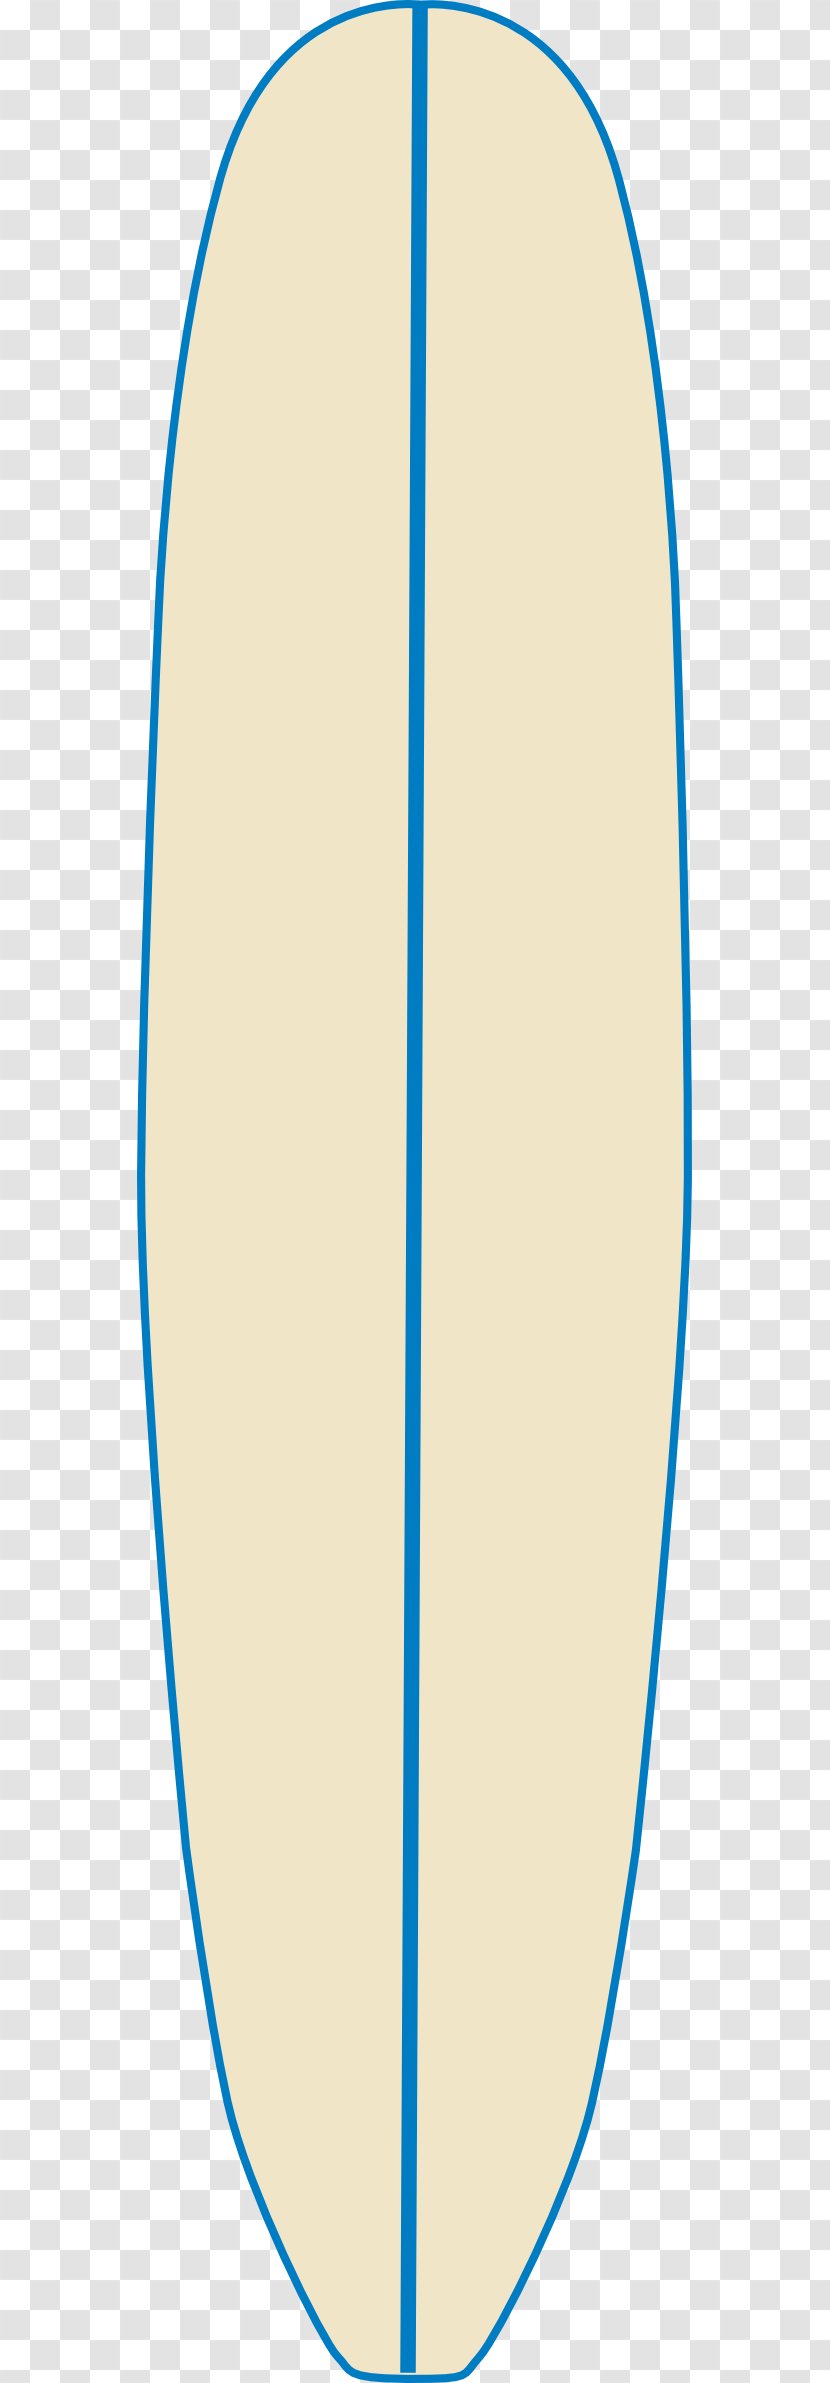 Surfboard Surfing Clip Art - Point - Surfboards Pictures Transparent PNG